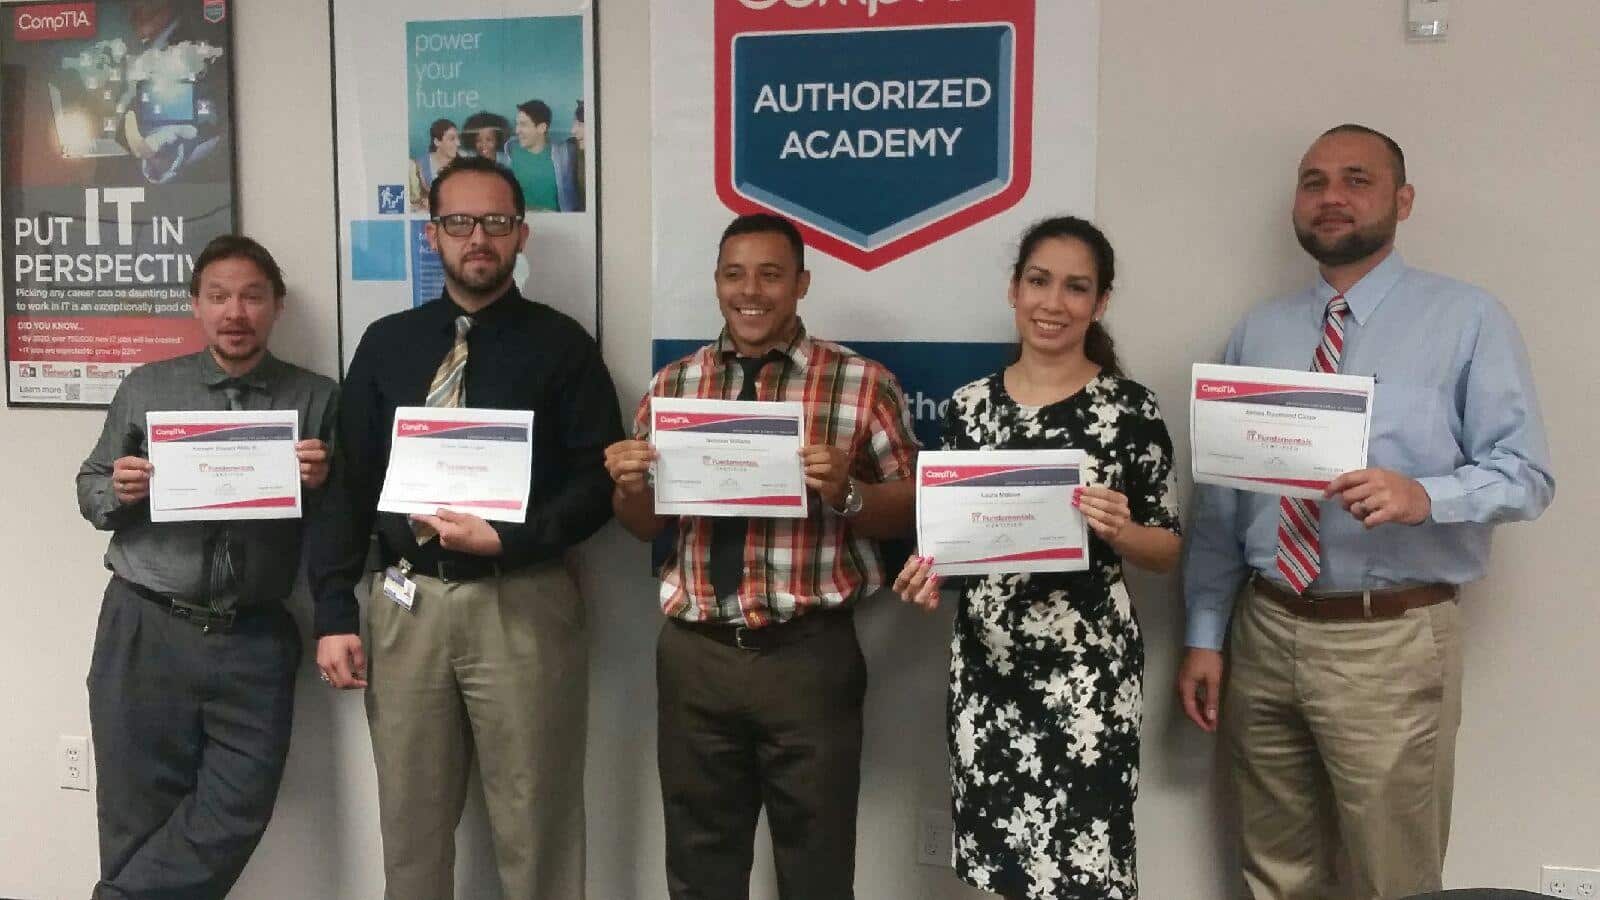 Information Technology Students at the Tampa Campus Earn Certifications